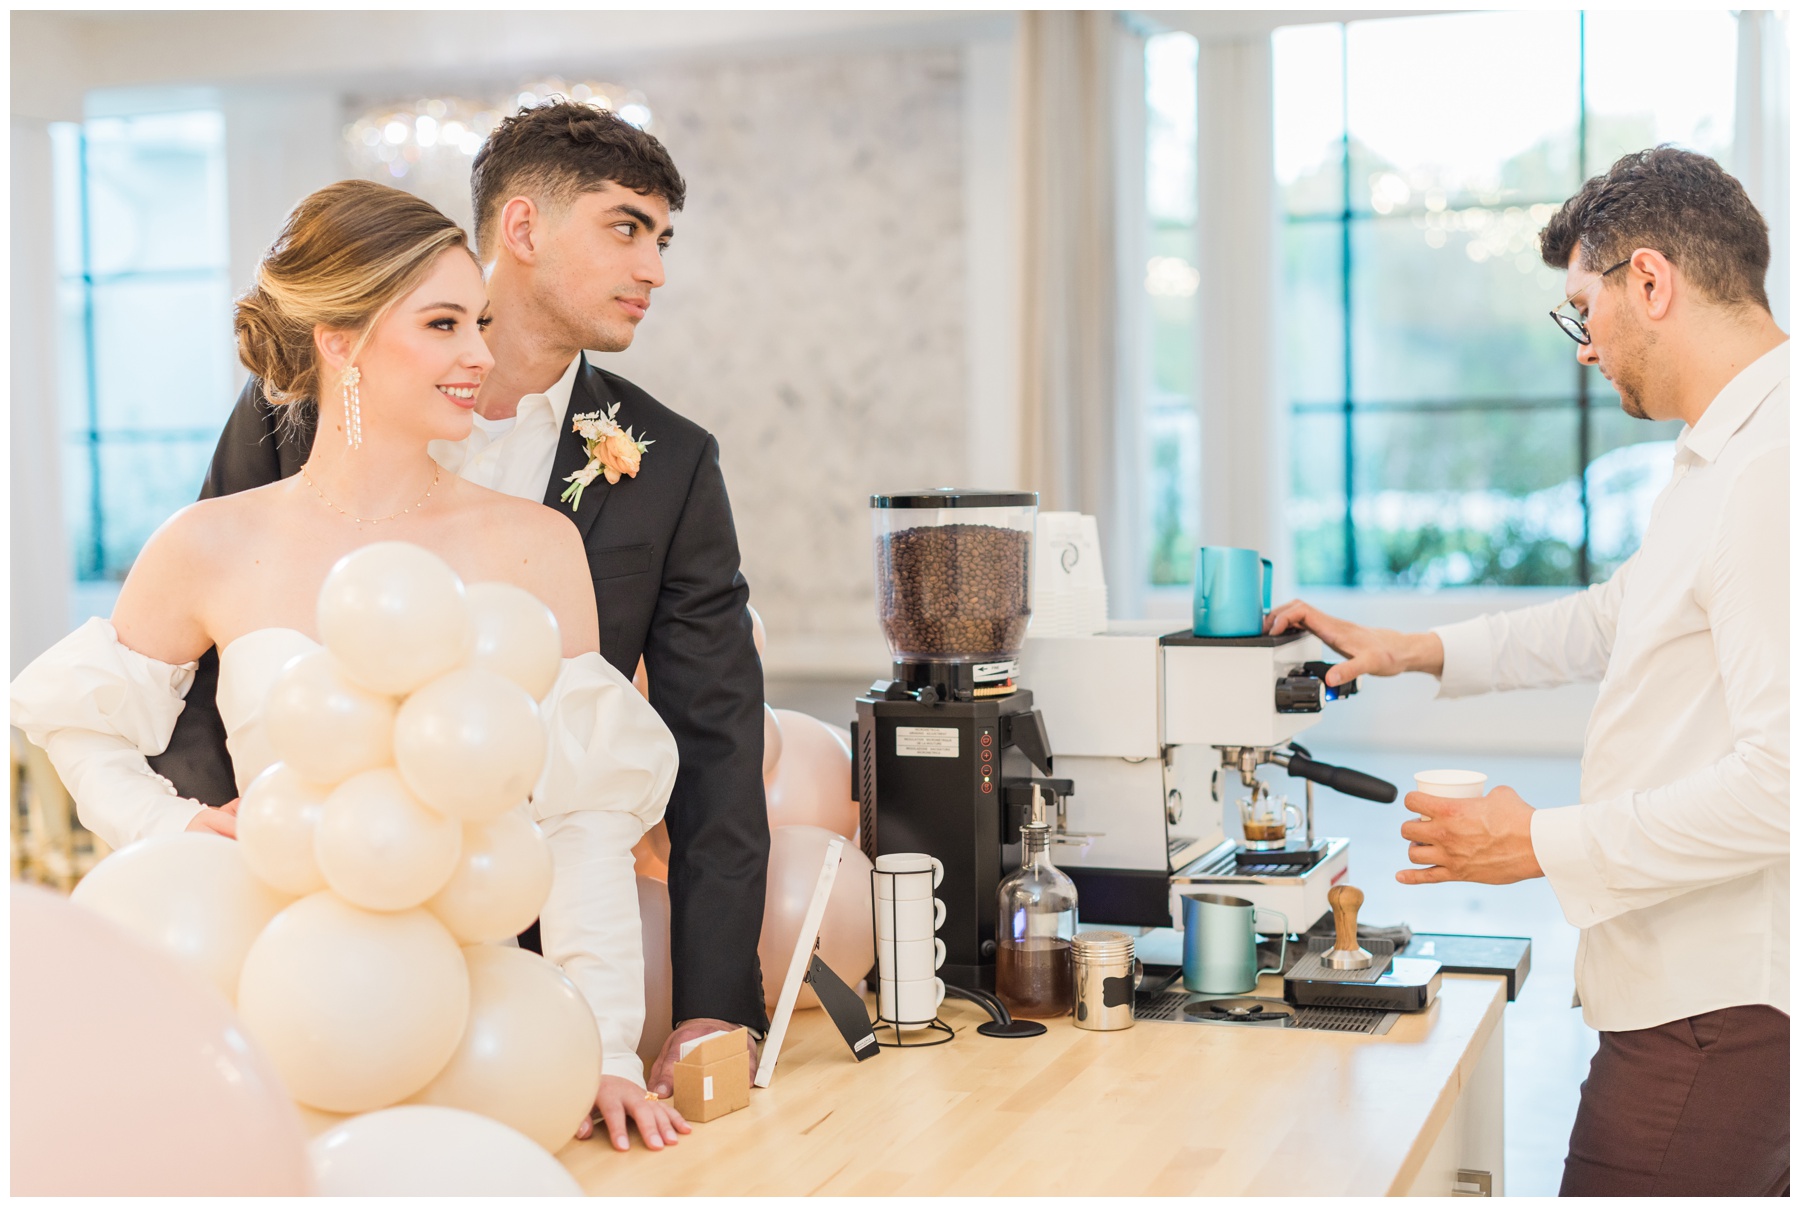 Brightside Coffee Cart decorated with blush and champagne balloons from Sugar Plum Event Co. for a wedding reception